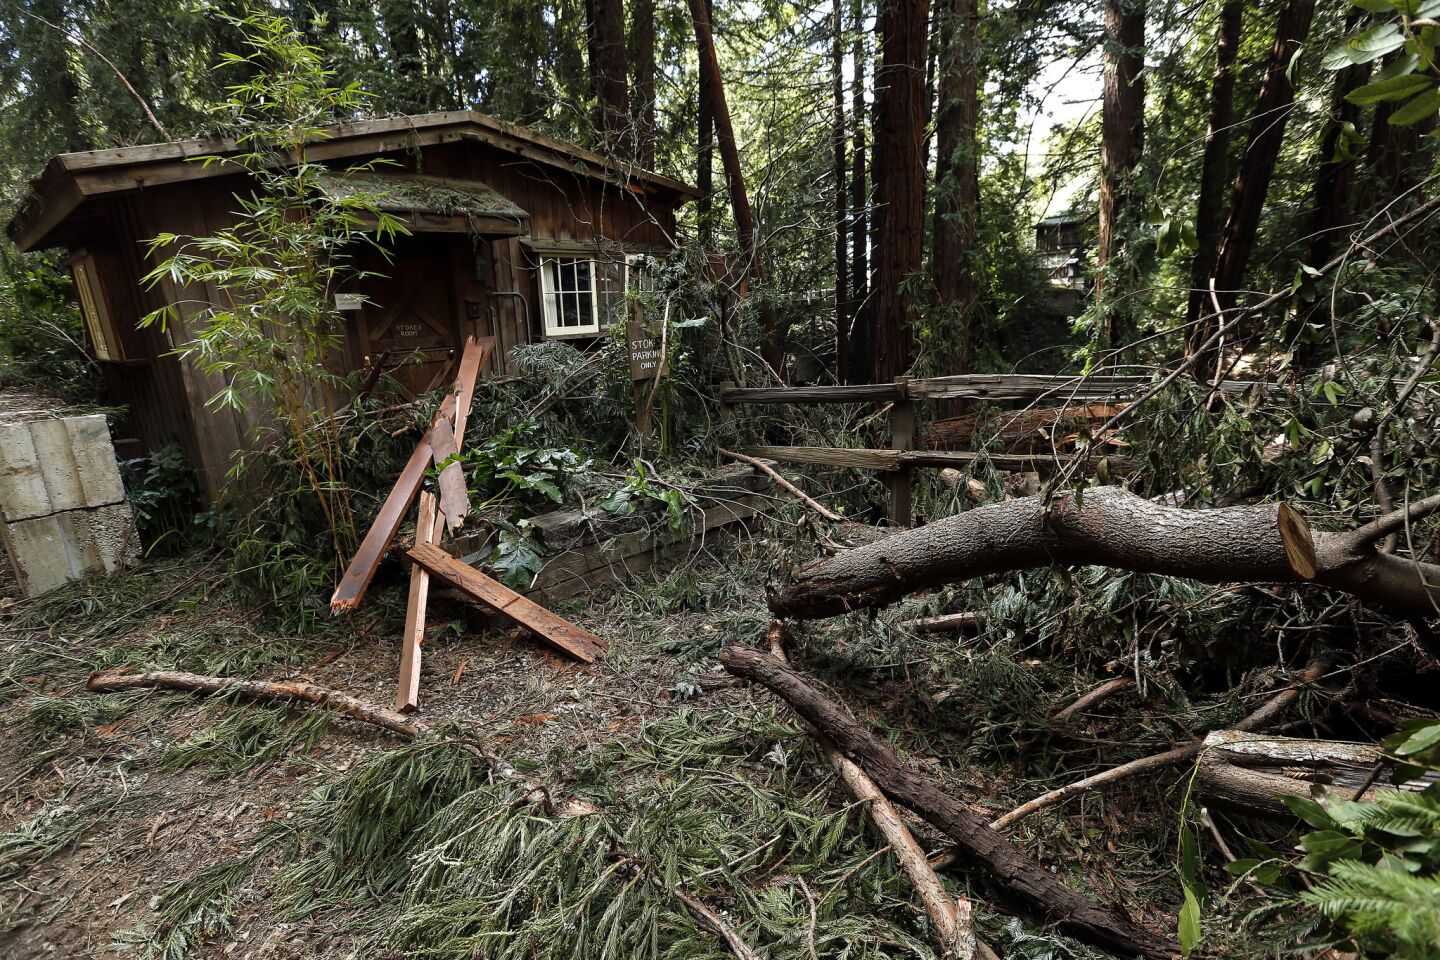 Of all the properties in Big Sur, Deetjen's Big Sur Inn was perhaps hit hardest by the winter storms. Falling redwoods damaged several of the hotel's historic buildings.